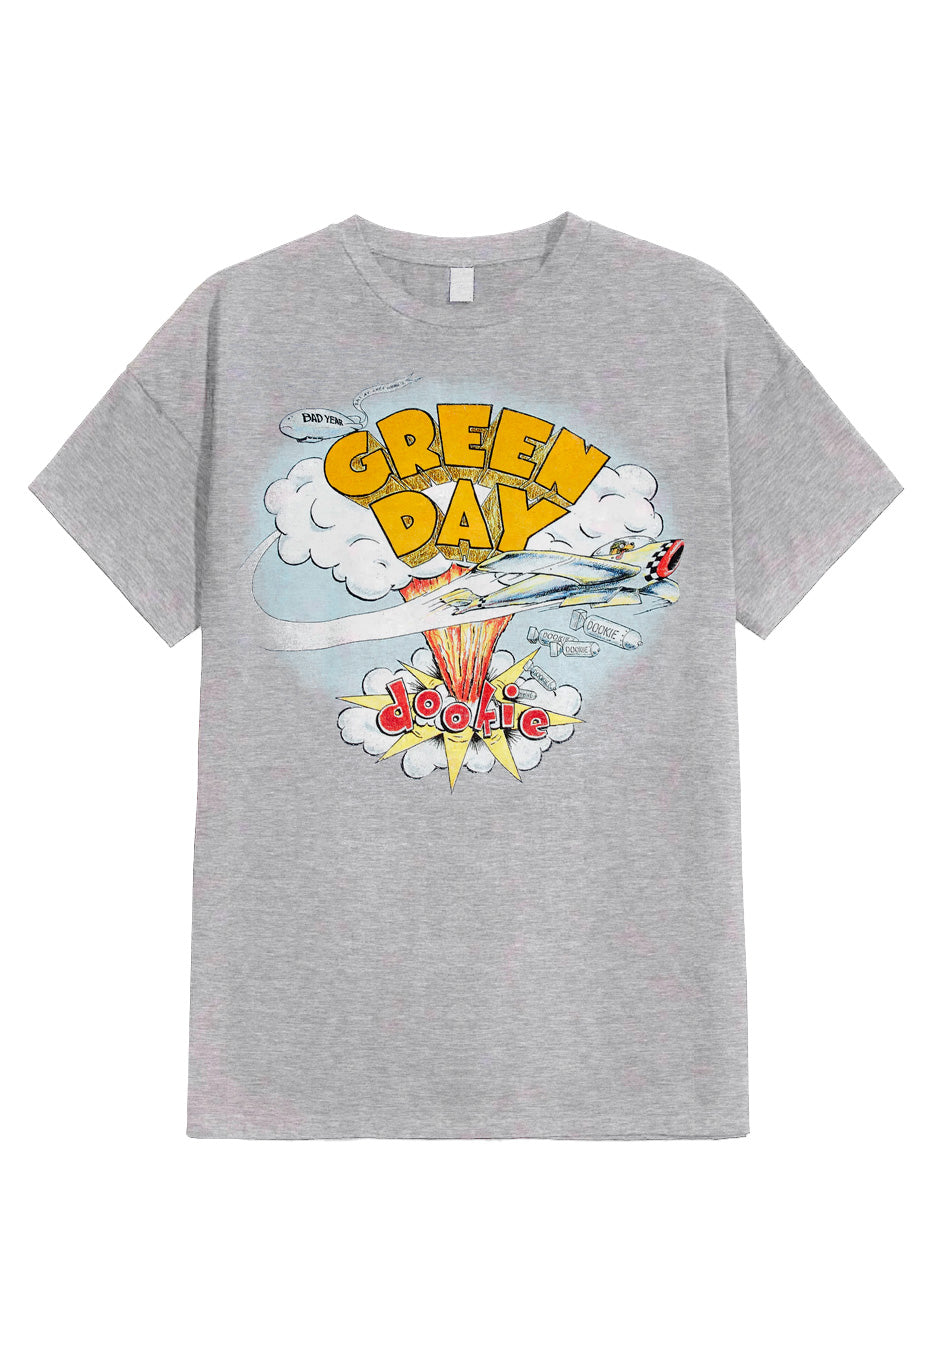 Green Day - Dookie Grey - T-Shirt